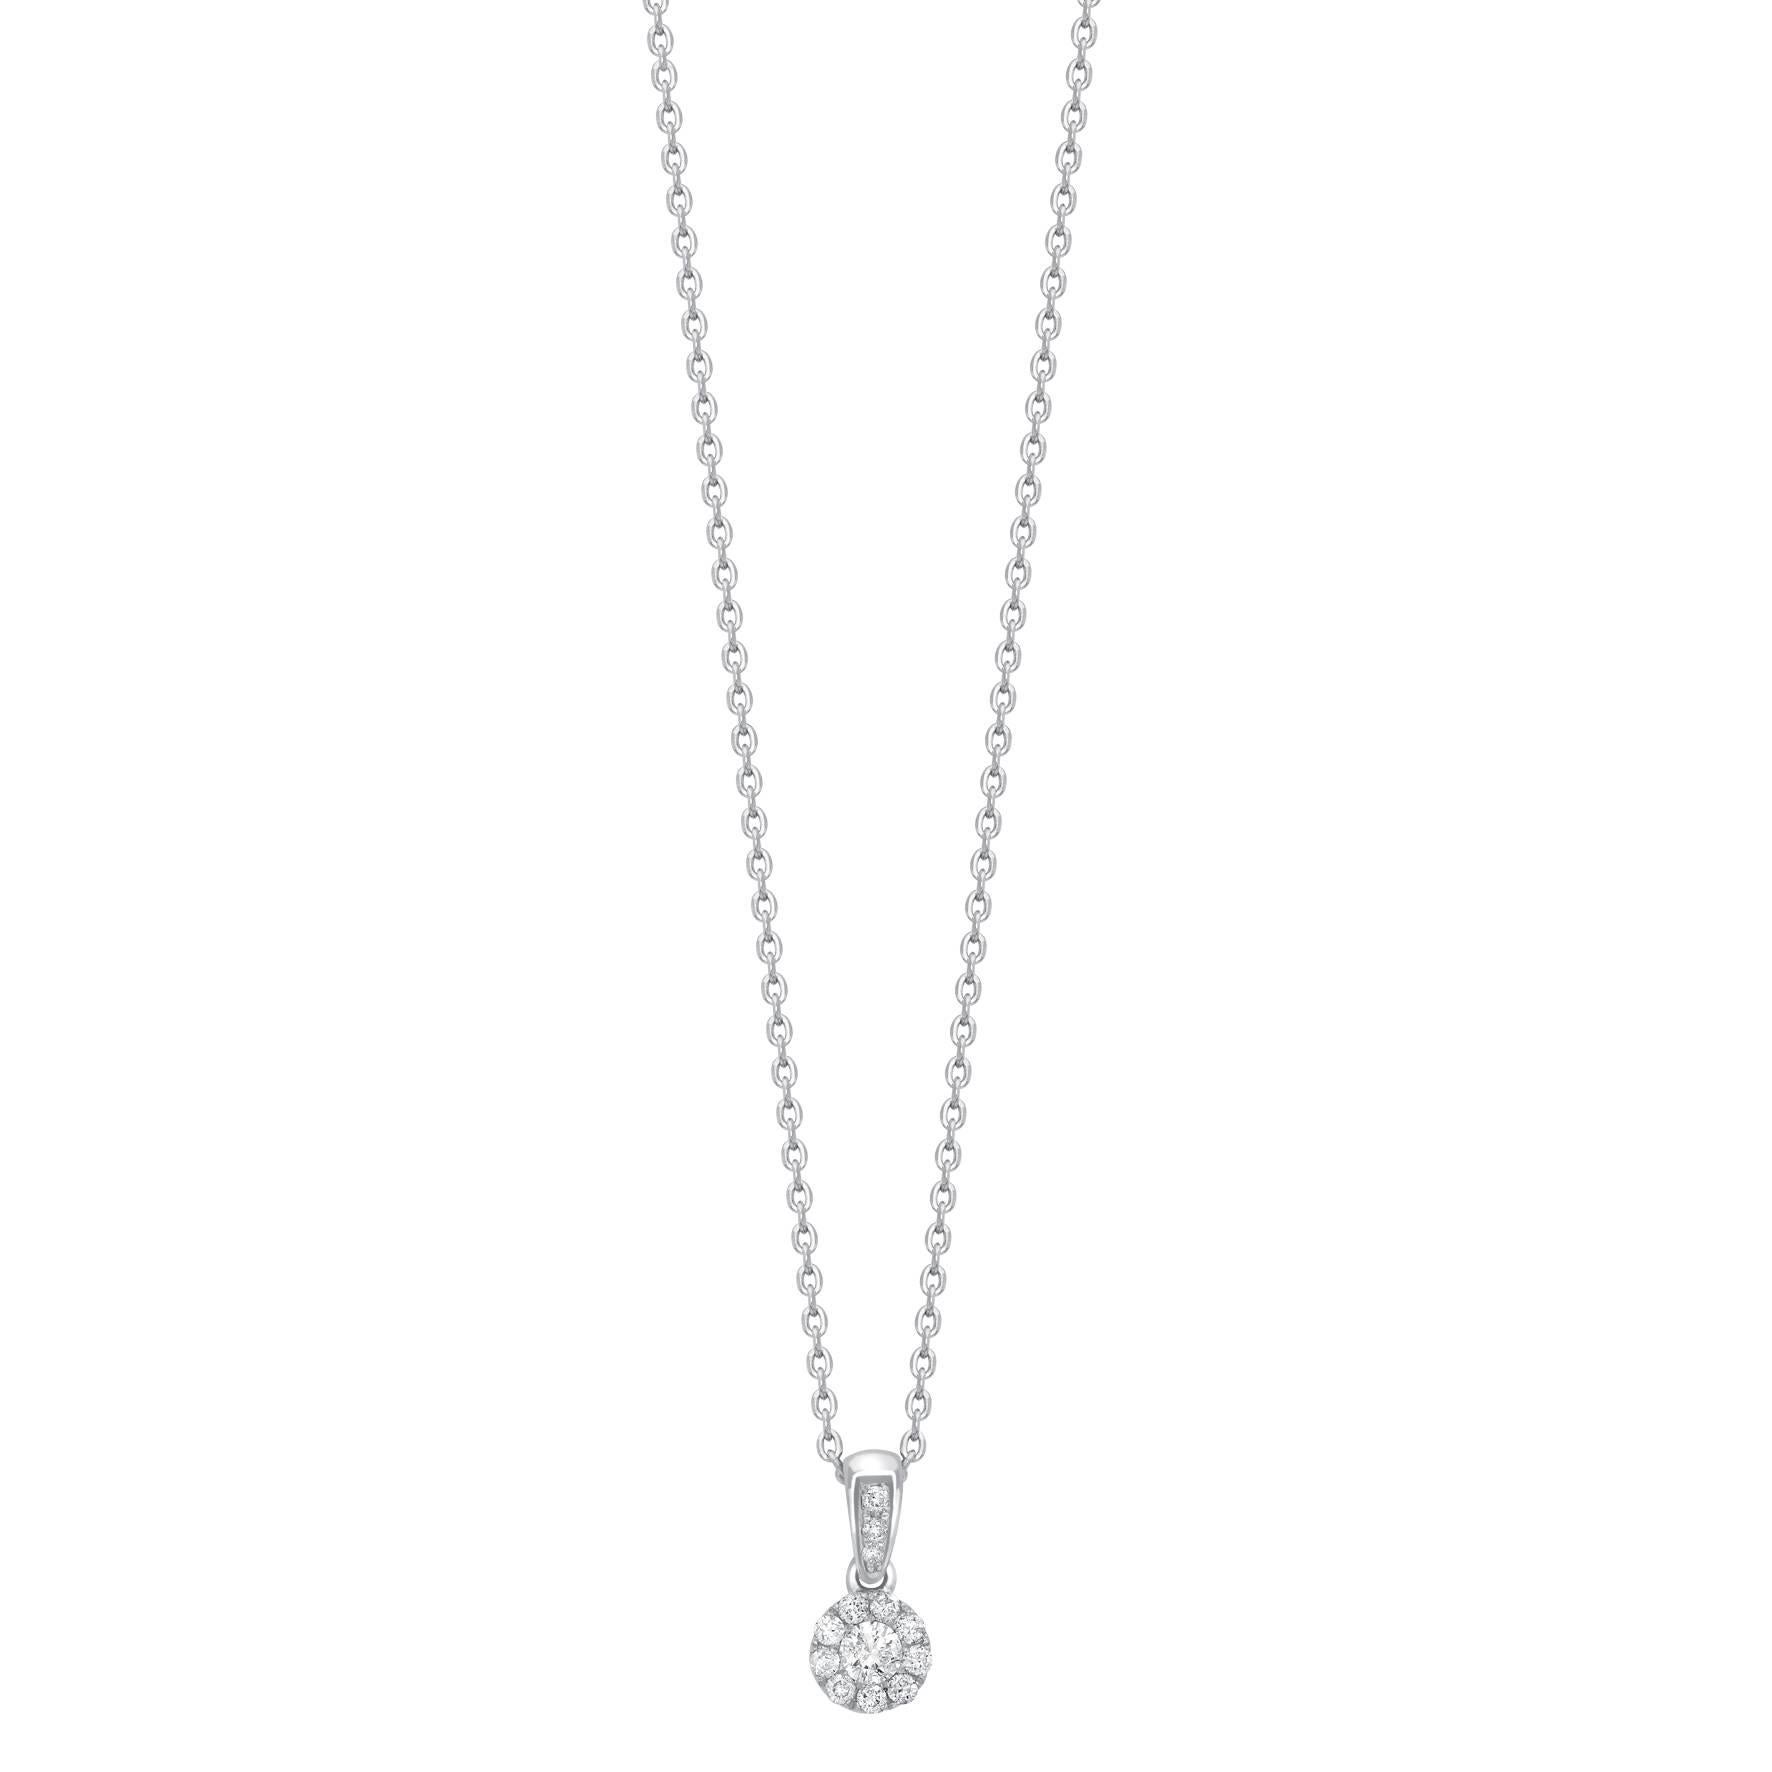 The height of sophistication. This delicate 4mm Round Brilliant Diamond pendant glistens with the diamonds highlighted by the 18 Karat White Gold setting. H-SI white diamonds in a round cluster with a pave set on the chain connector. The center